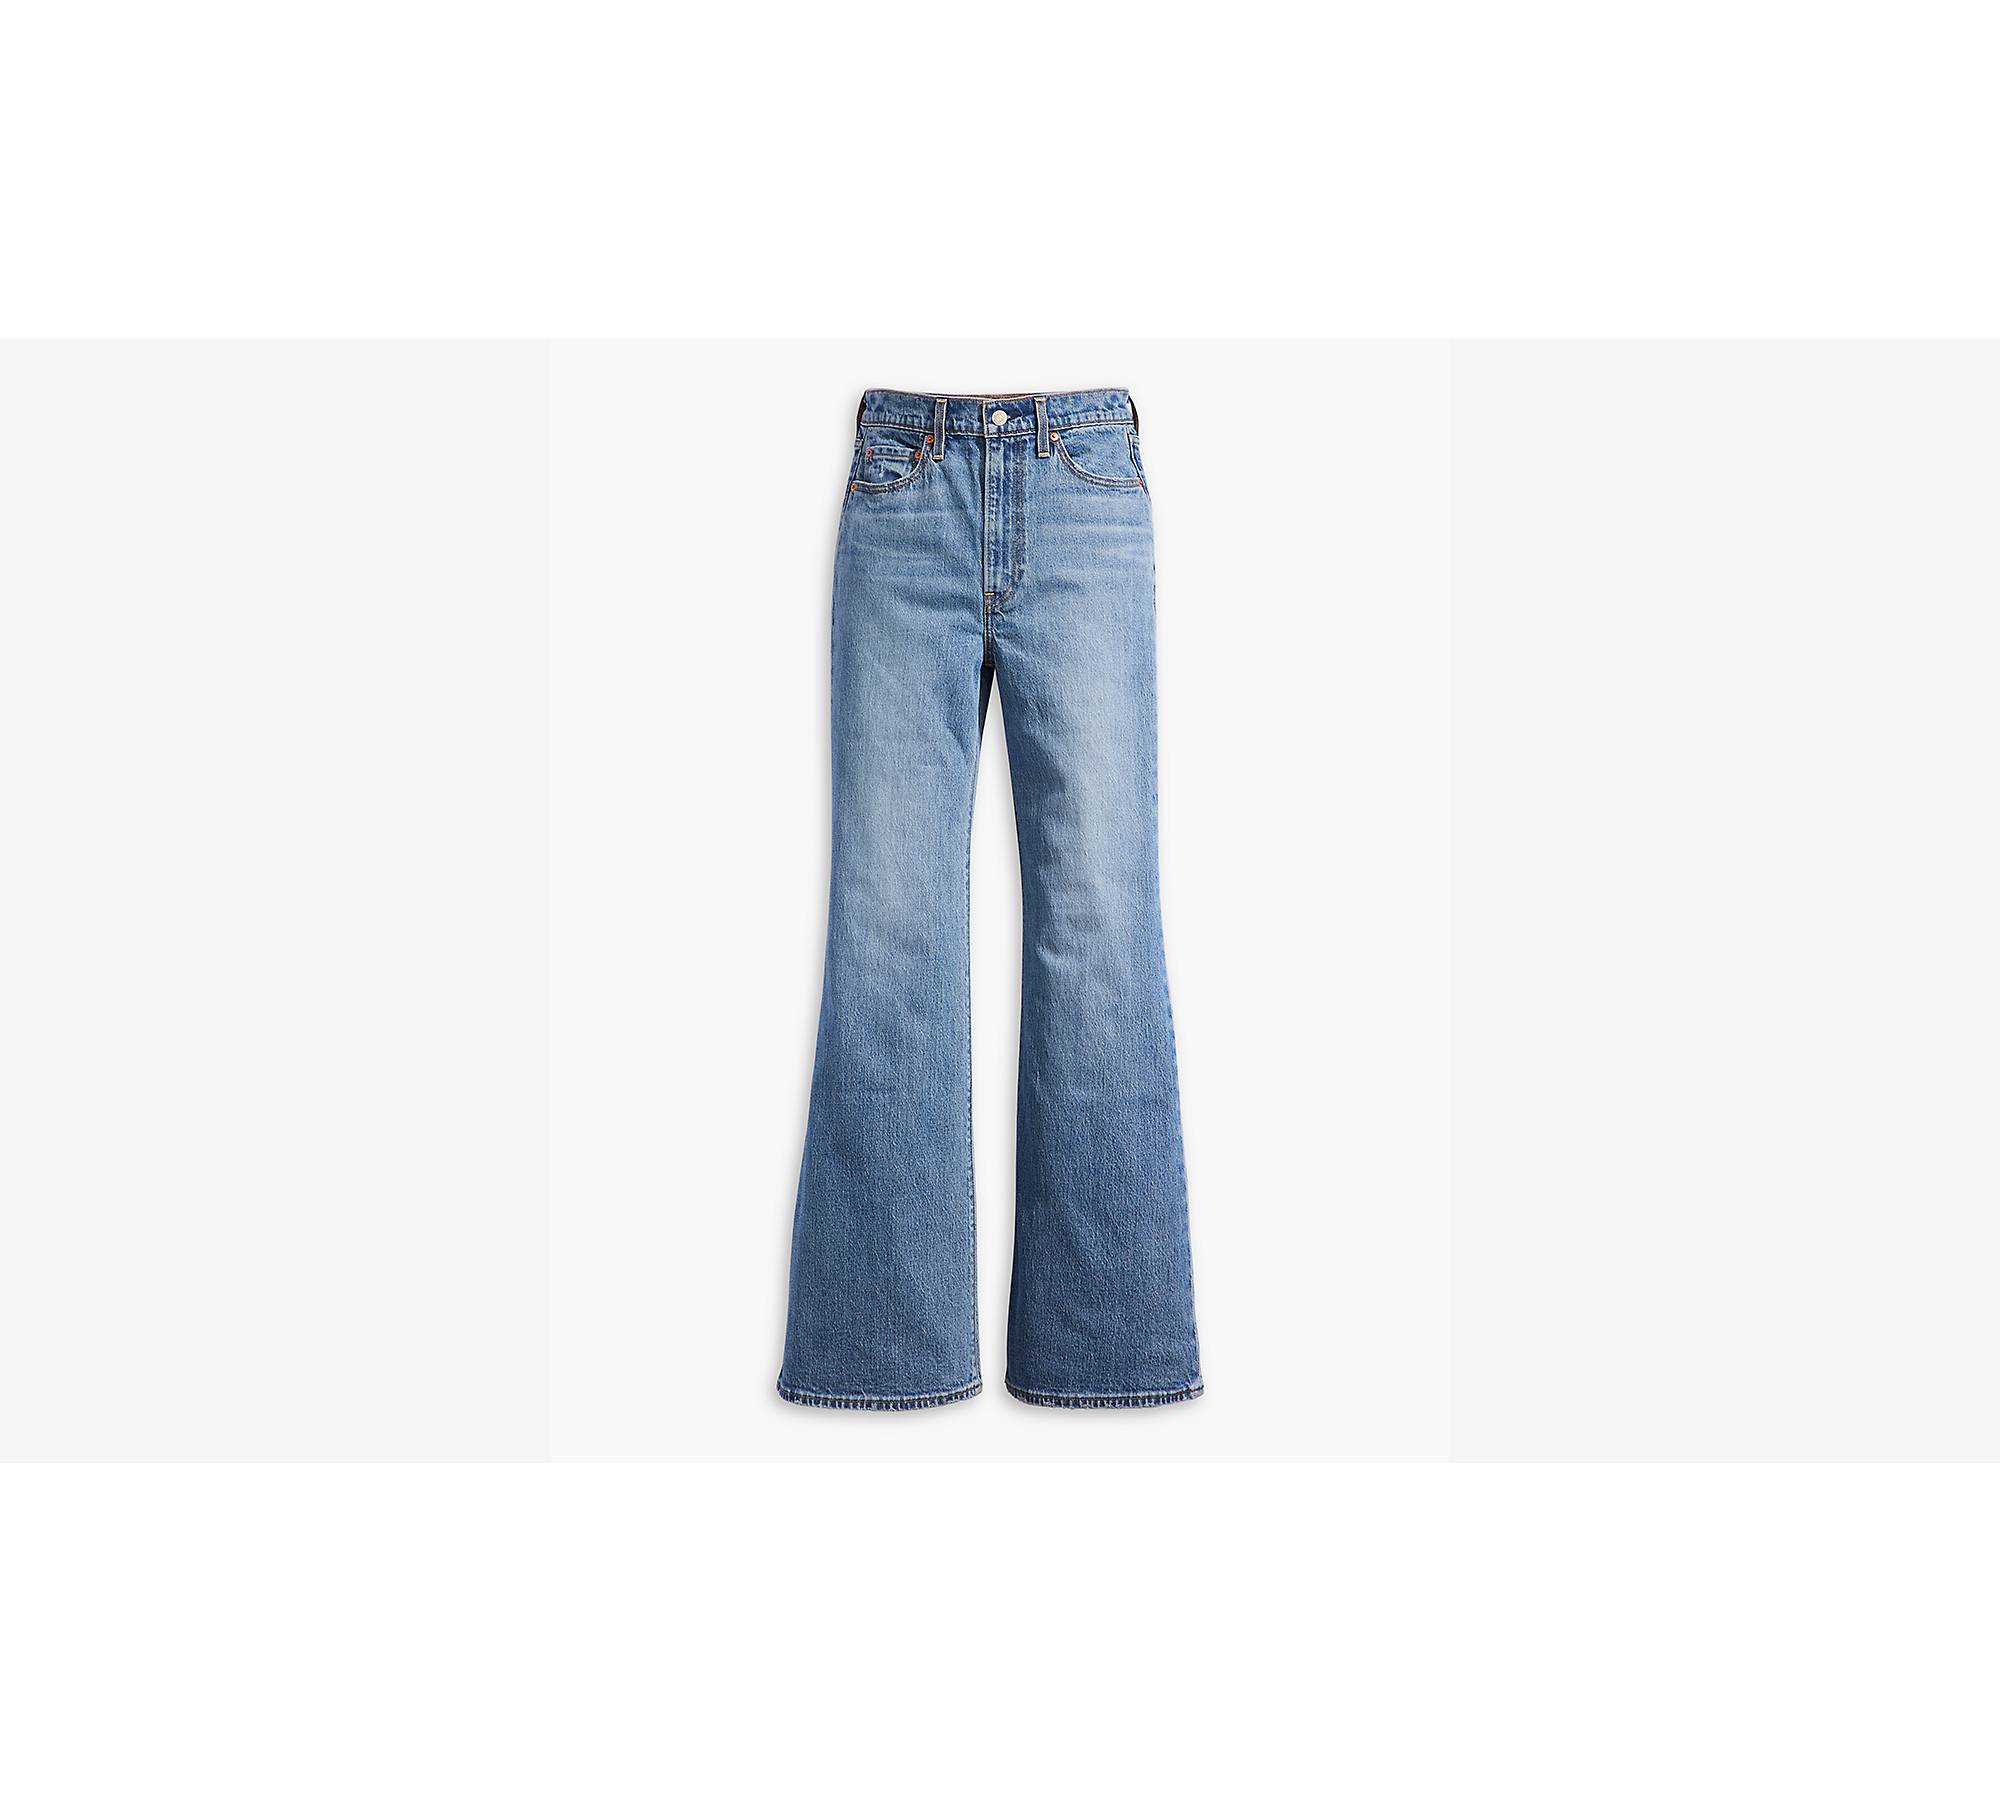 LEVI'S Ribcage Bell Womens Jeans - A New York Moment - VINTAGE MED